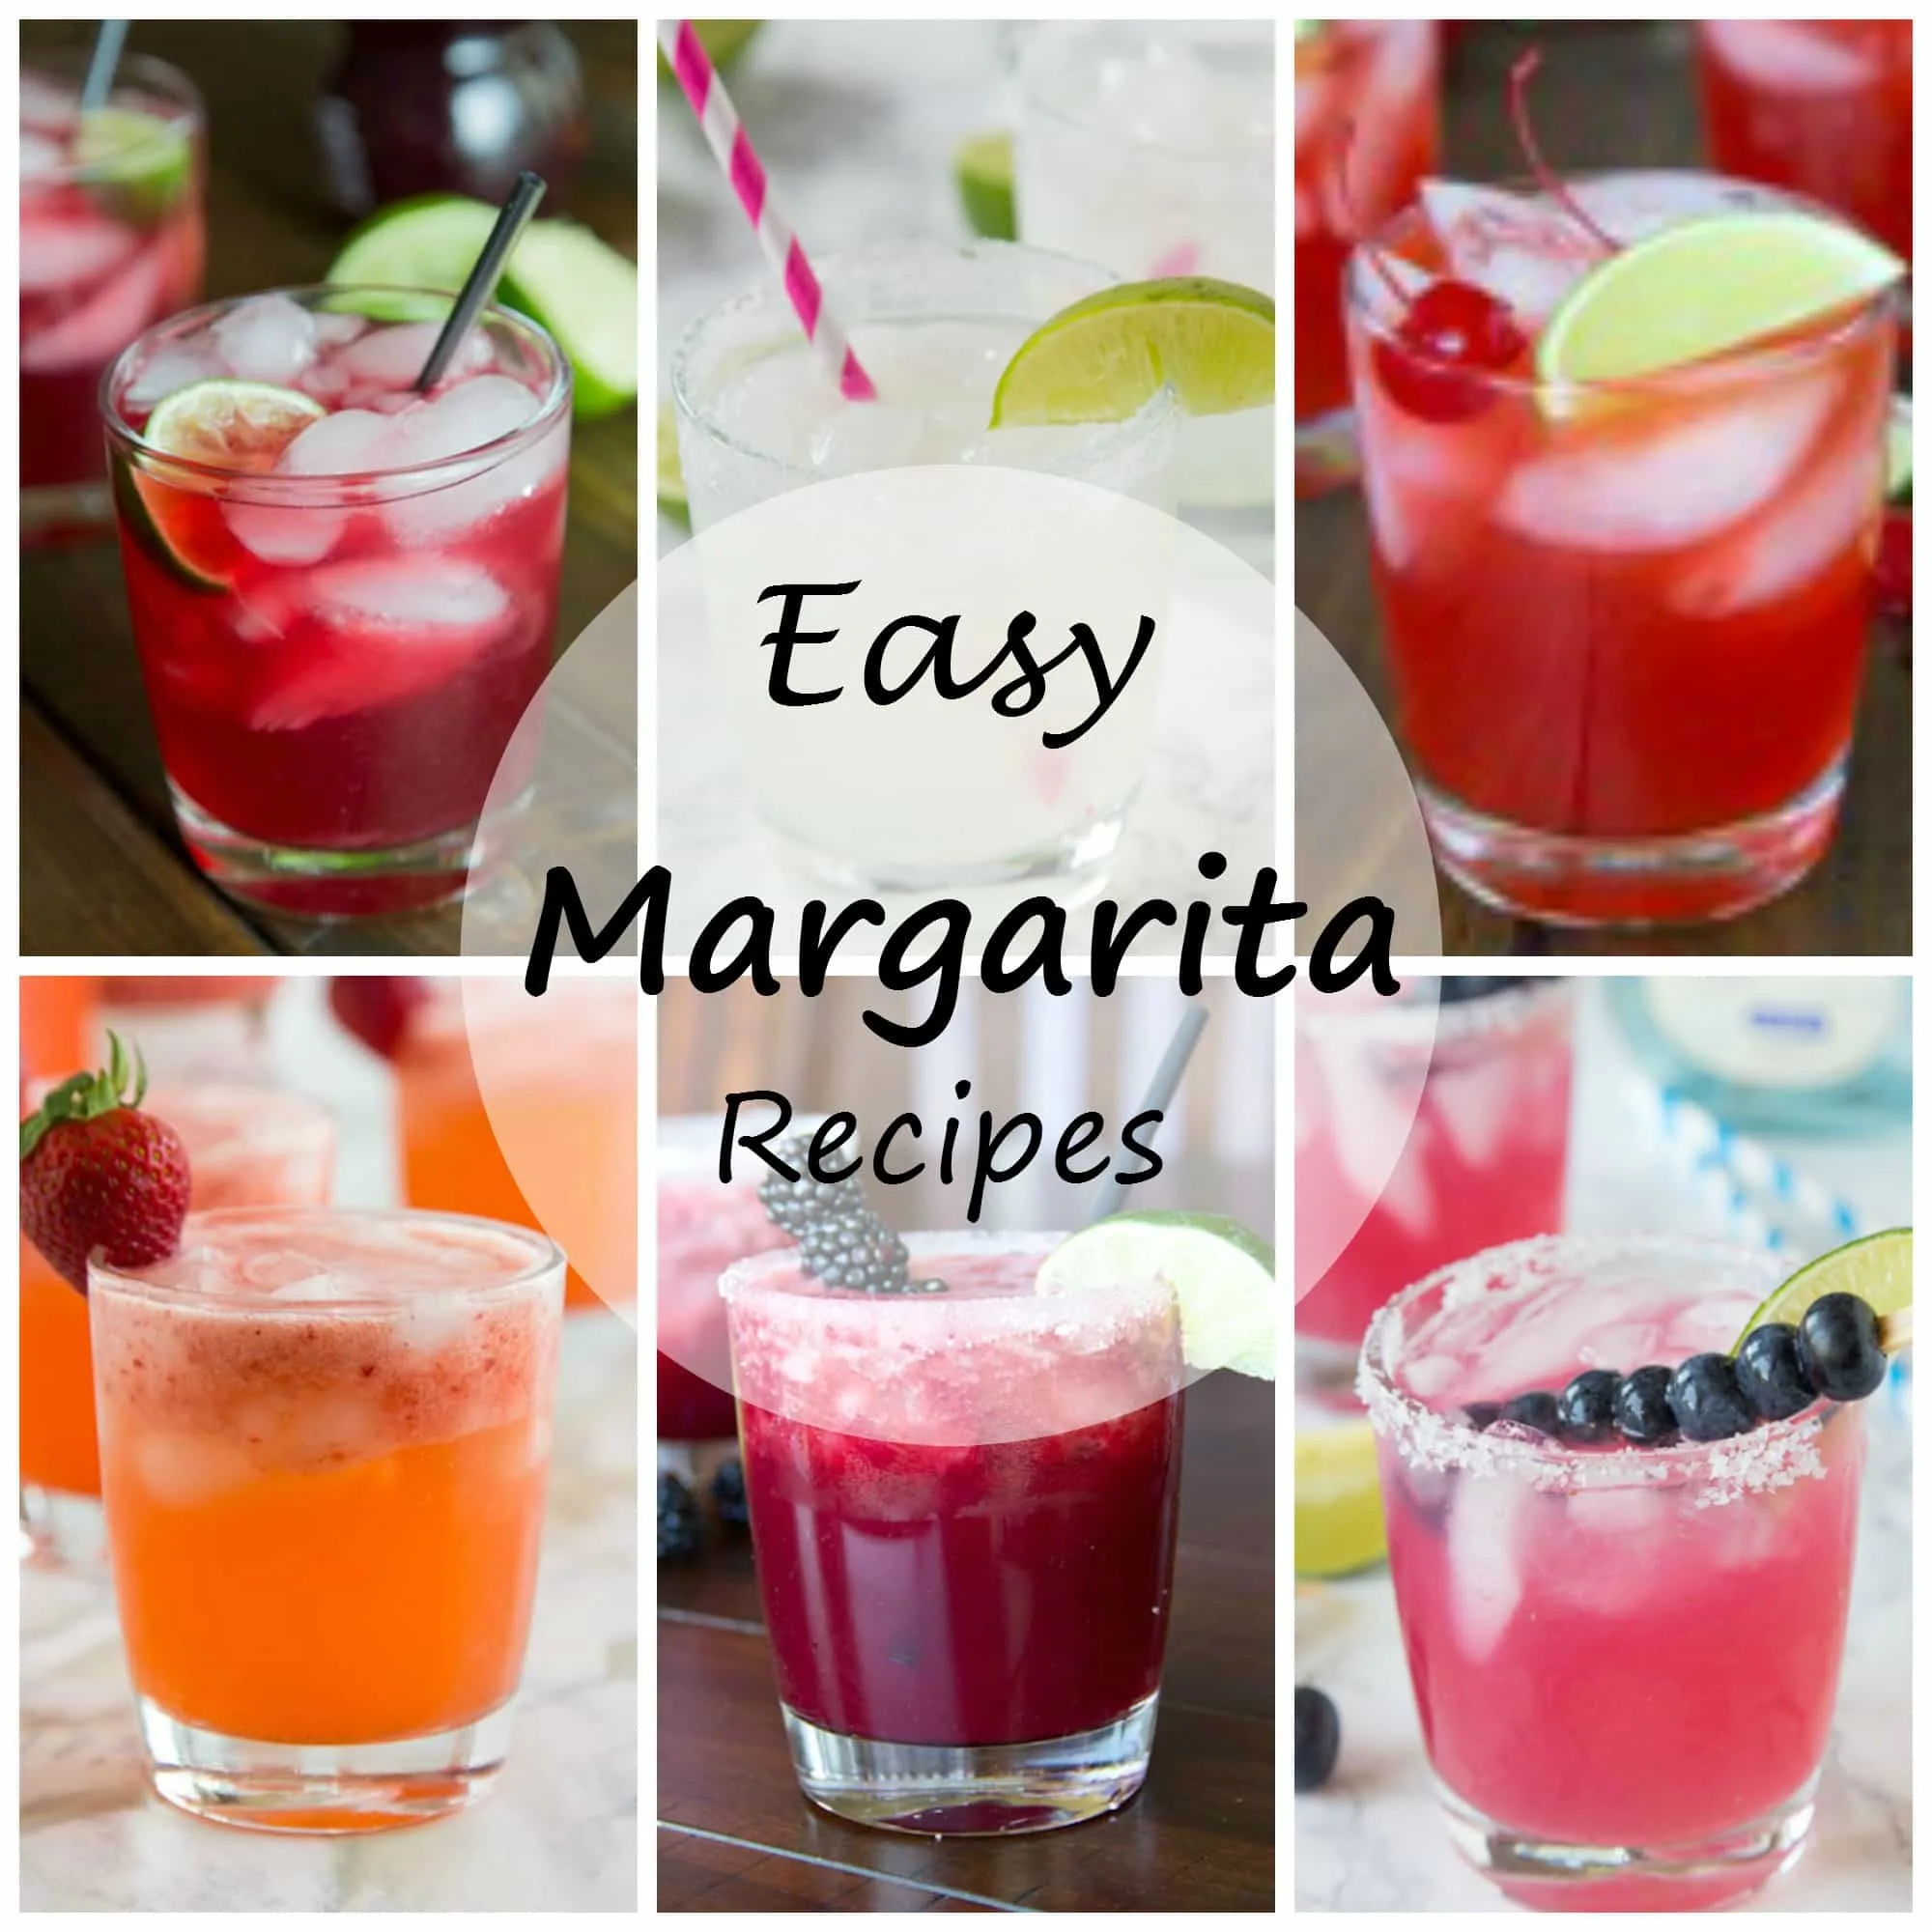 6 Margarita Recipes - get ready for Cinco de Mayo or just happy hour with these great easy margarita recipes! Lots of great flavors to make it different each night!